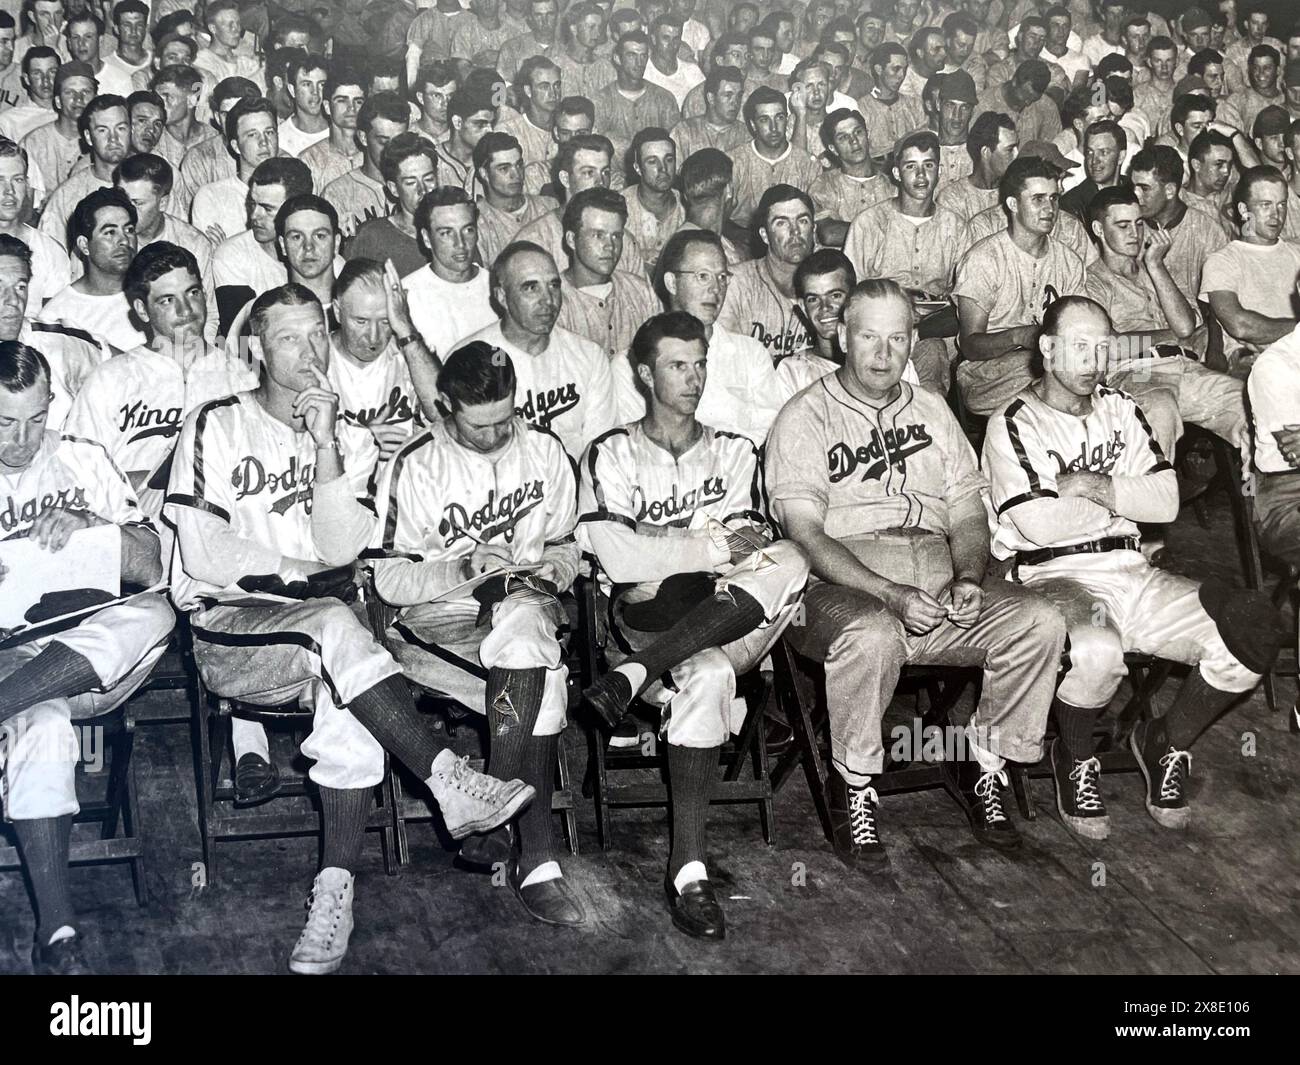 Vintage photo on display at Dodgertown complex showing a crowded room full of Dodger personal and aspiring baseball players hoping to make the team in Vero Beach, Florida, USA circa 1950s. Stock Photo